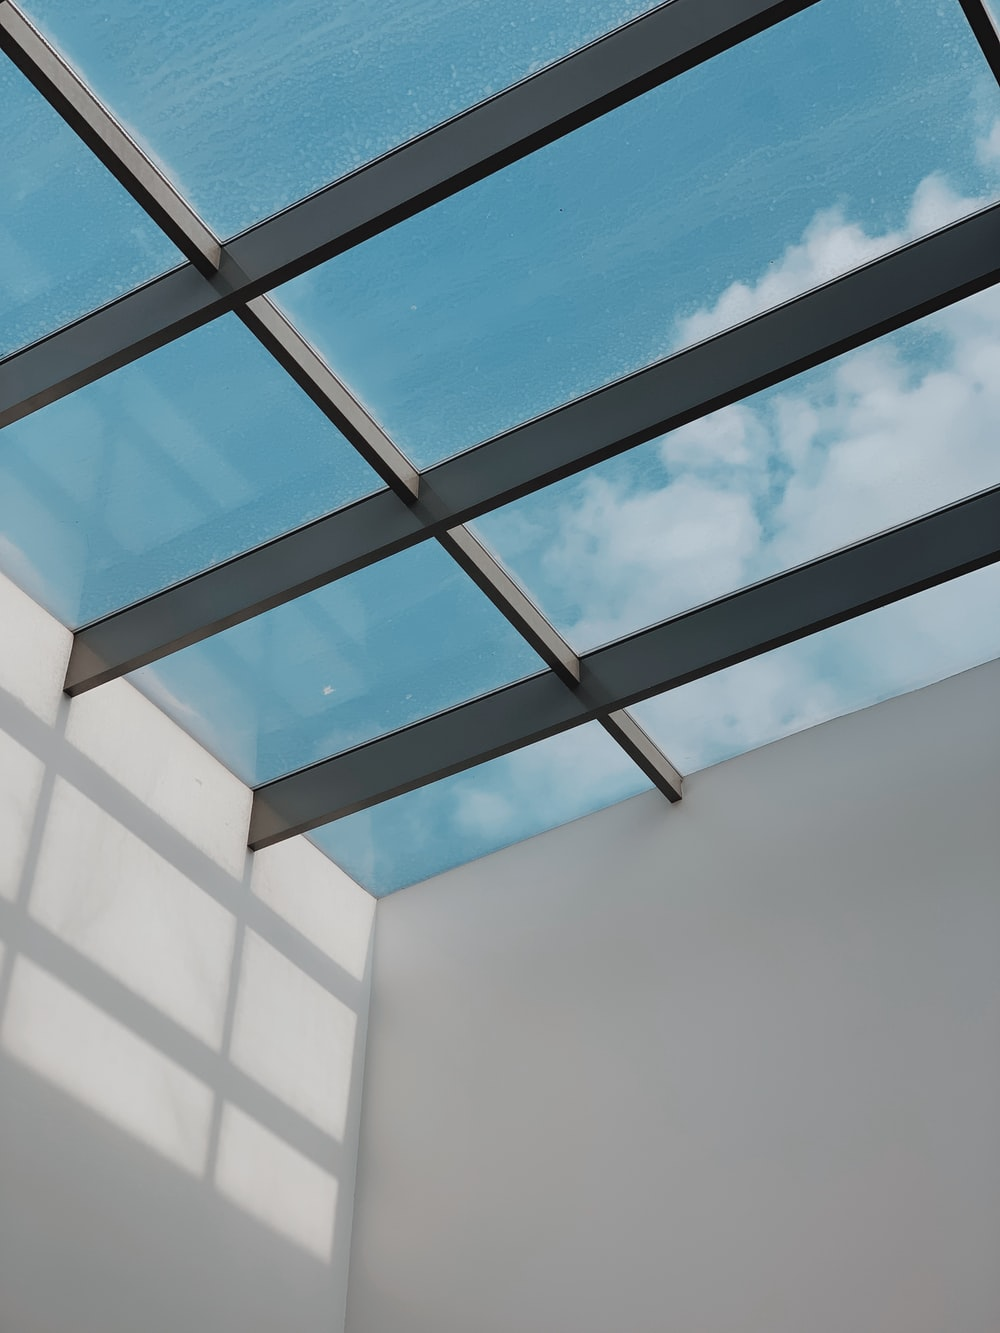 A skylight made of tempered glass